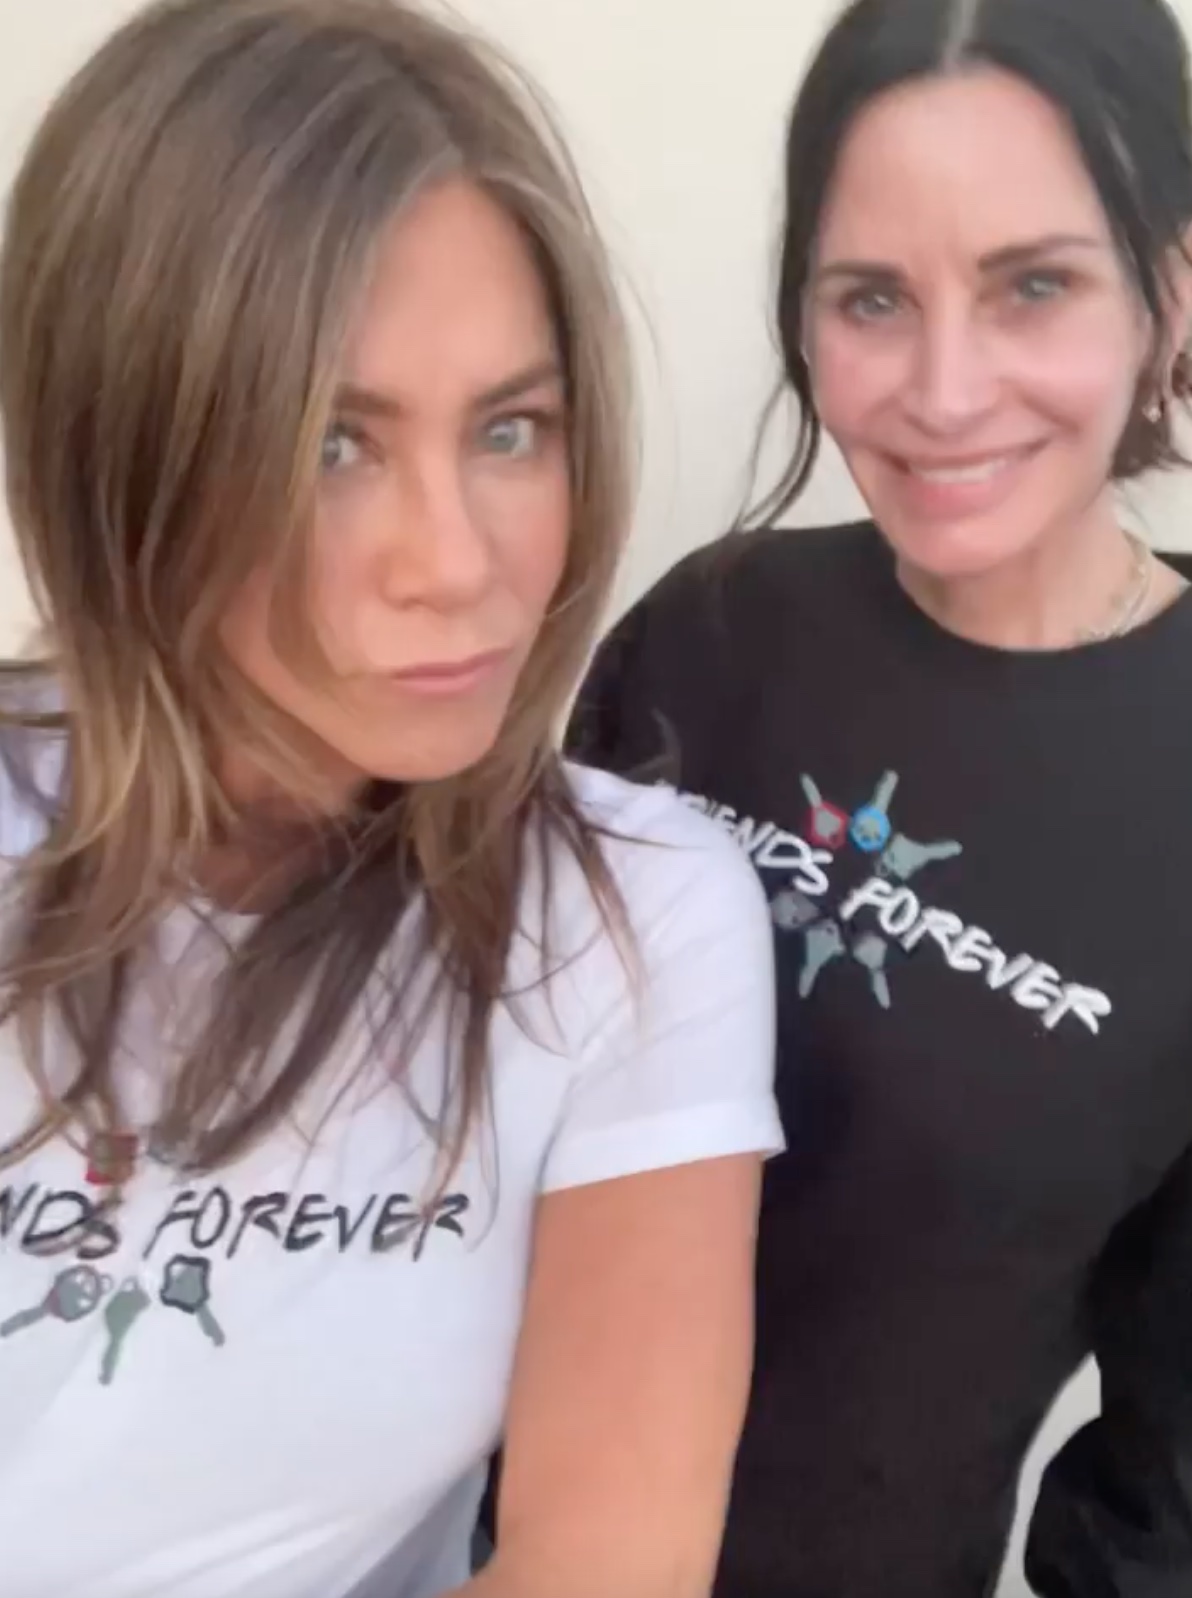 Courteney Cox Jennifer Aniston Porn - Courteney Cox With No Makeup: Unfiltered Photos of the Actress